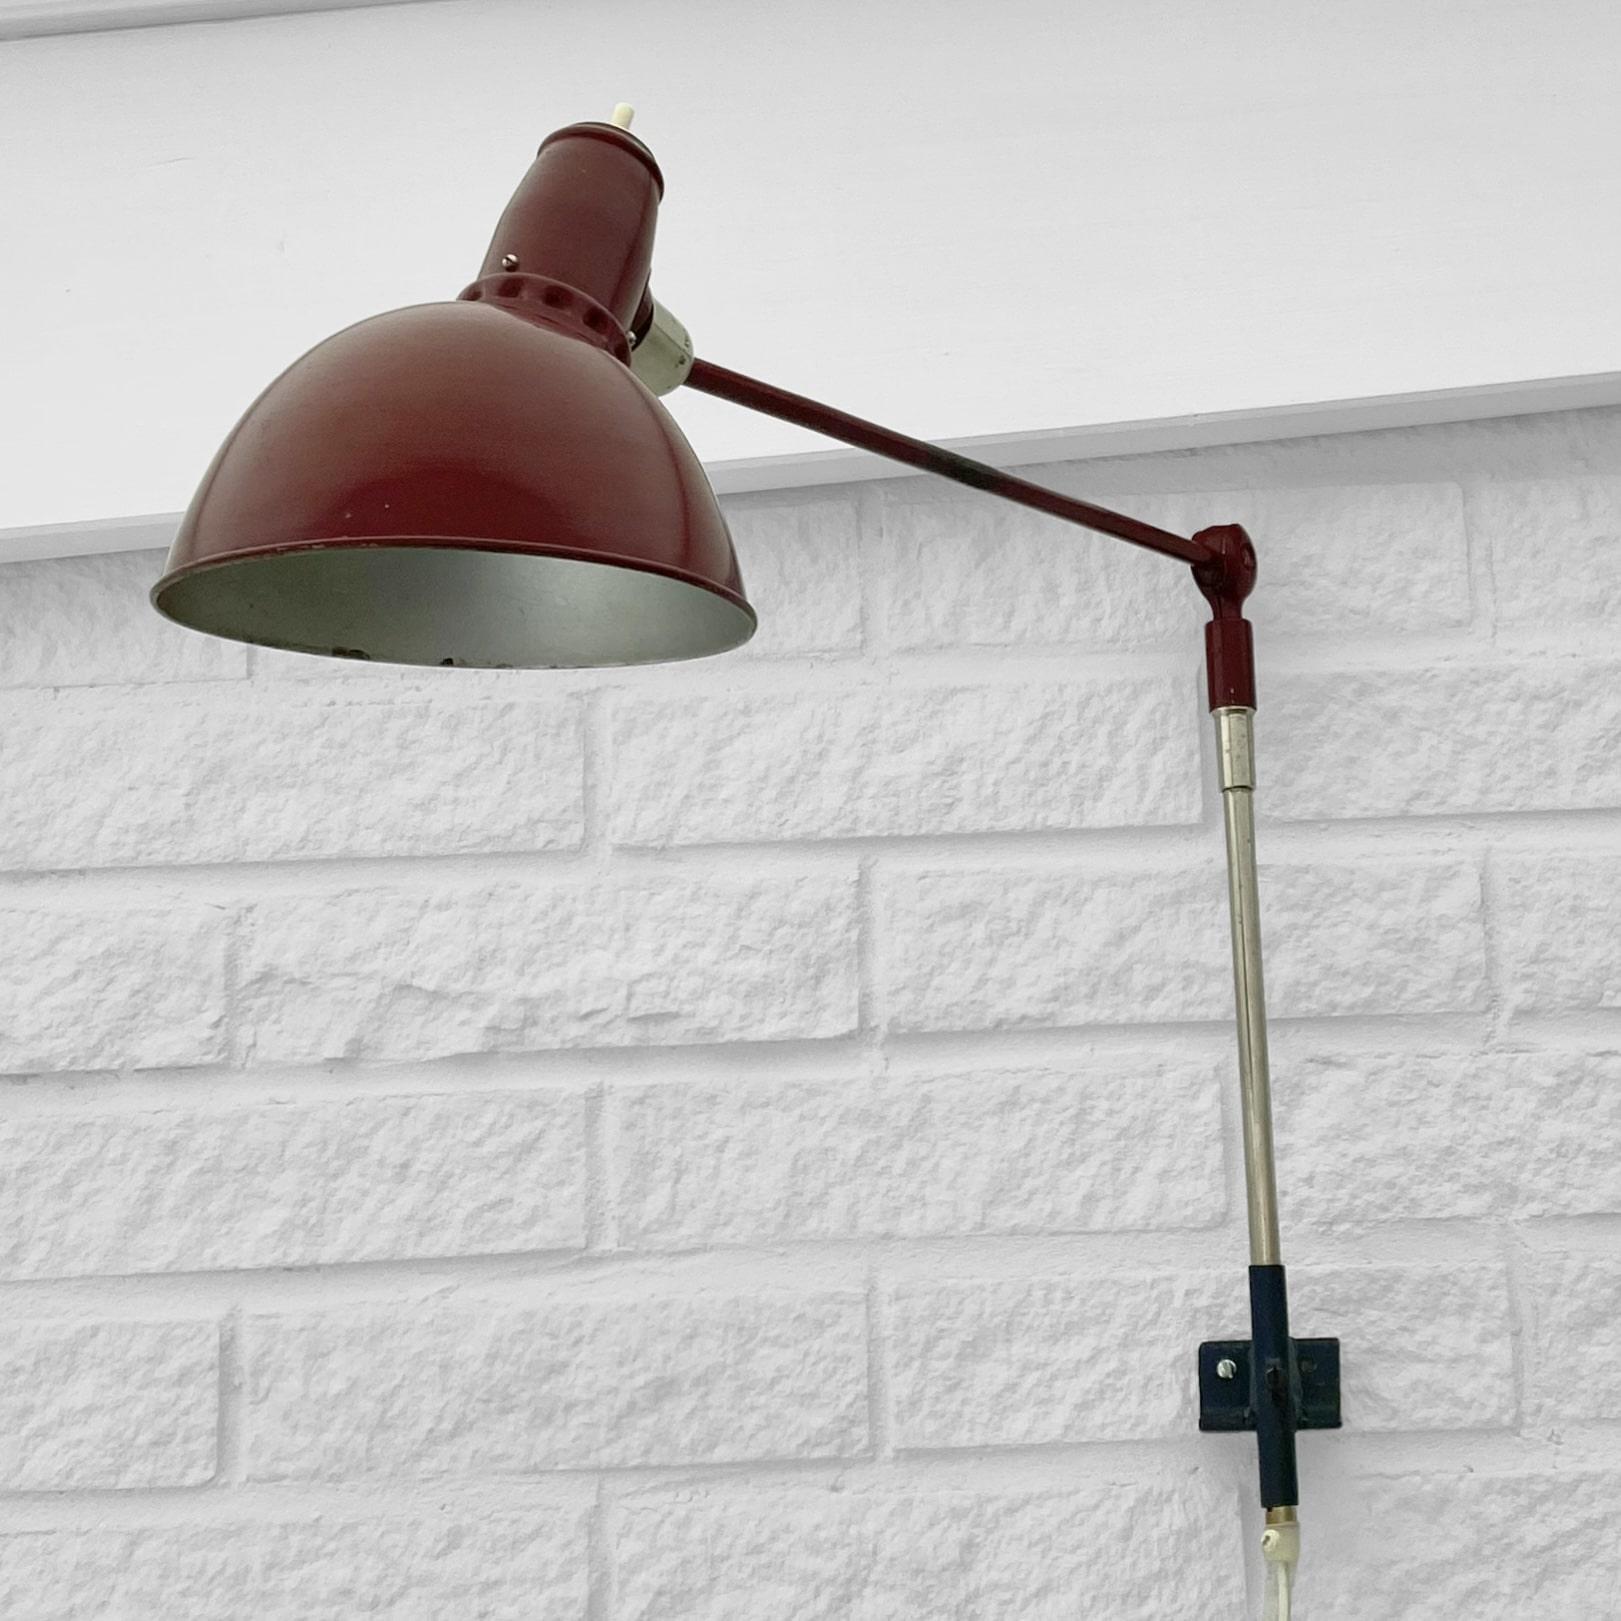 A table or wall lamp model Triplex Lillpendel type TP, developed by the Swedish inventor Johan Petter Johansson. Constructed from steel and aluminum, painted deep red with chrome details. This smaller model of the Triplex lamp was designed to be